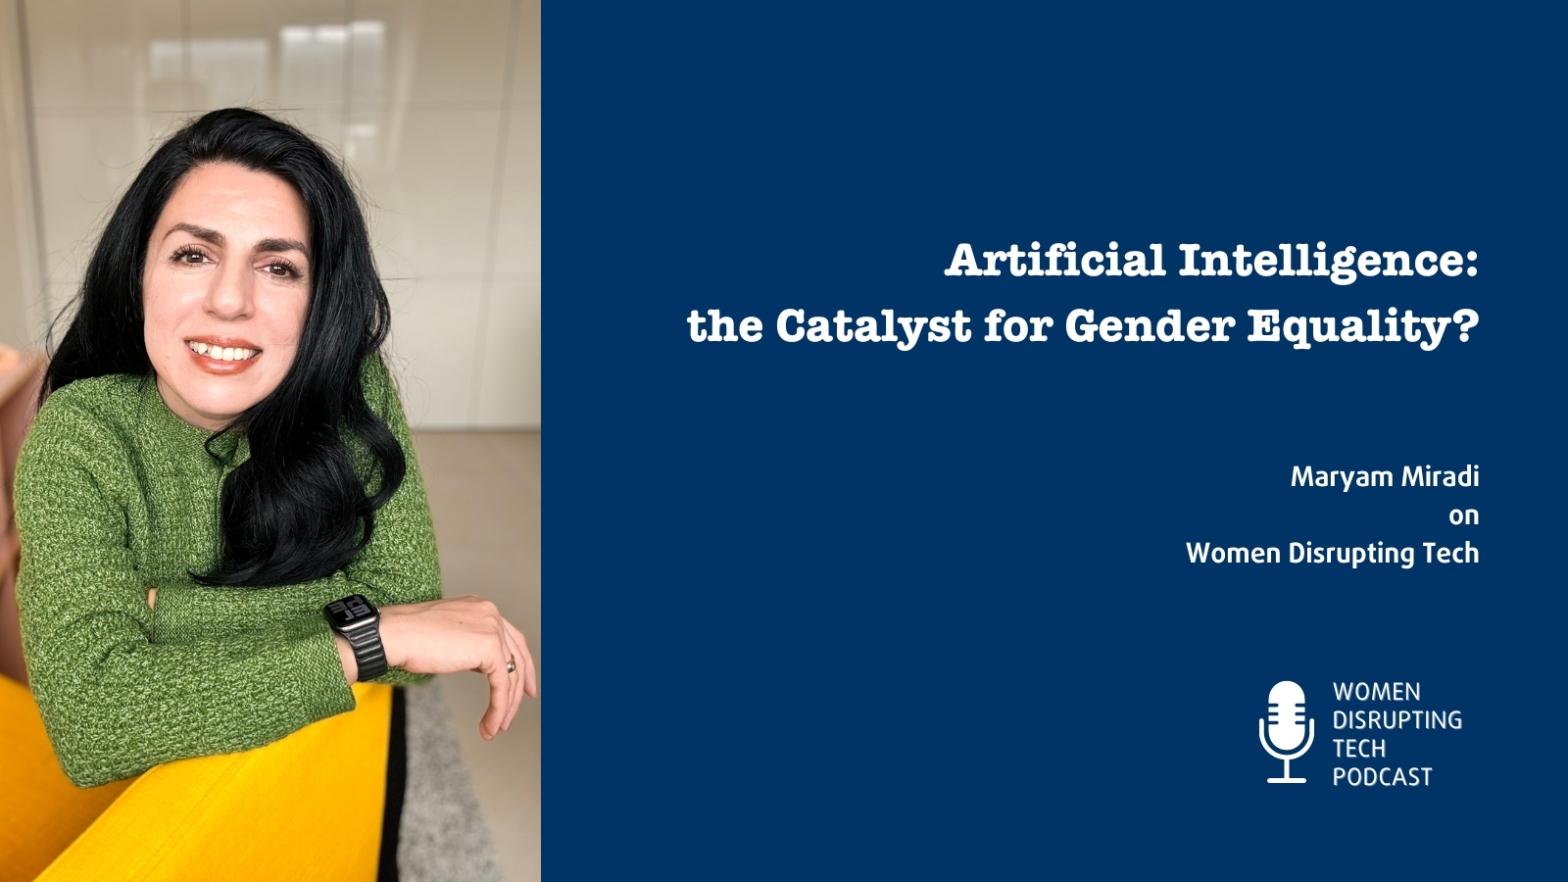 Artificial Intelligence: the Catalyst for Gender Equality?| Show notes on Episode 46 with Maryam Miradi